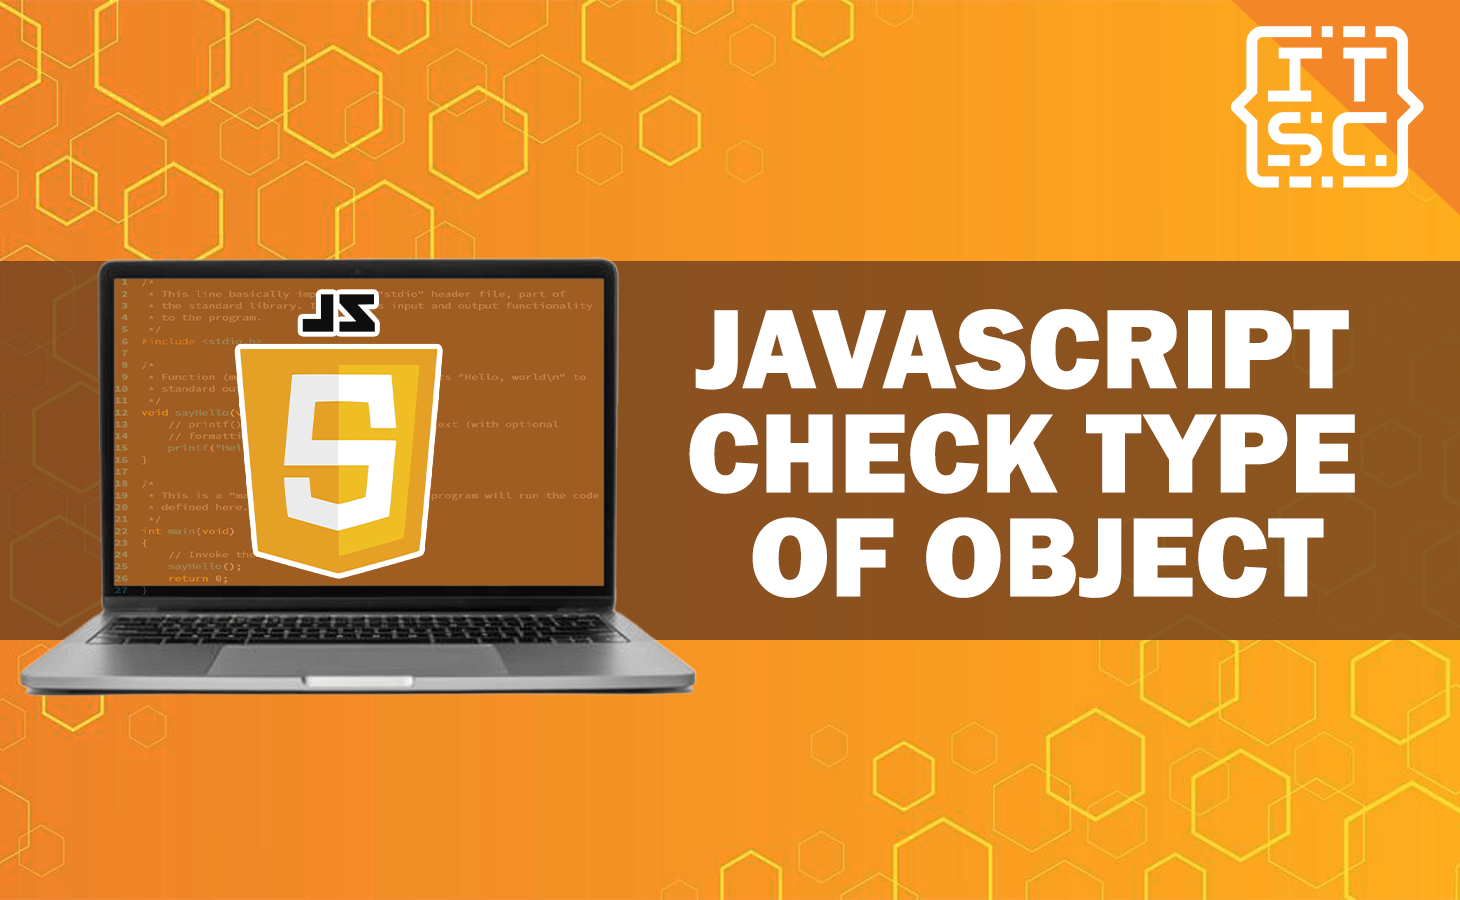 How to check the type of object or variable in JavaScript?